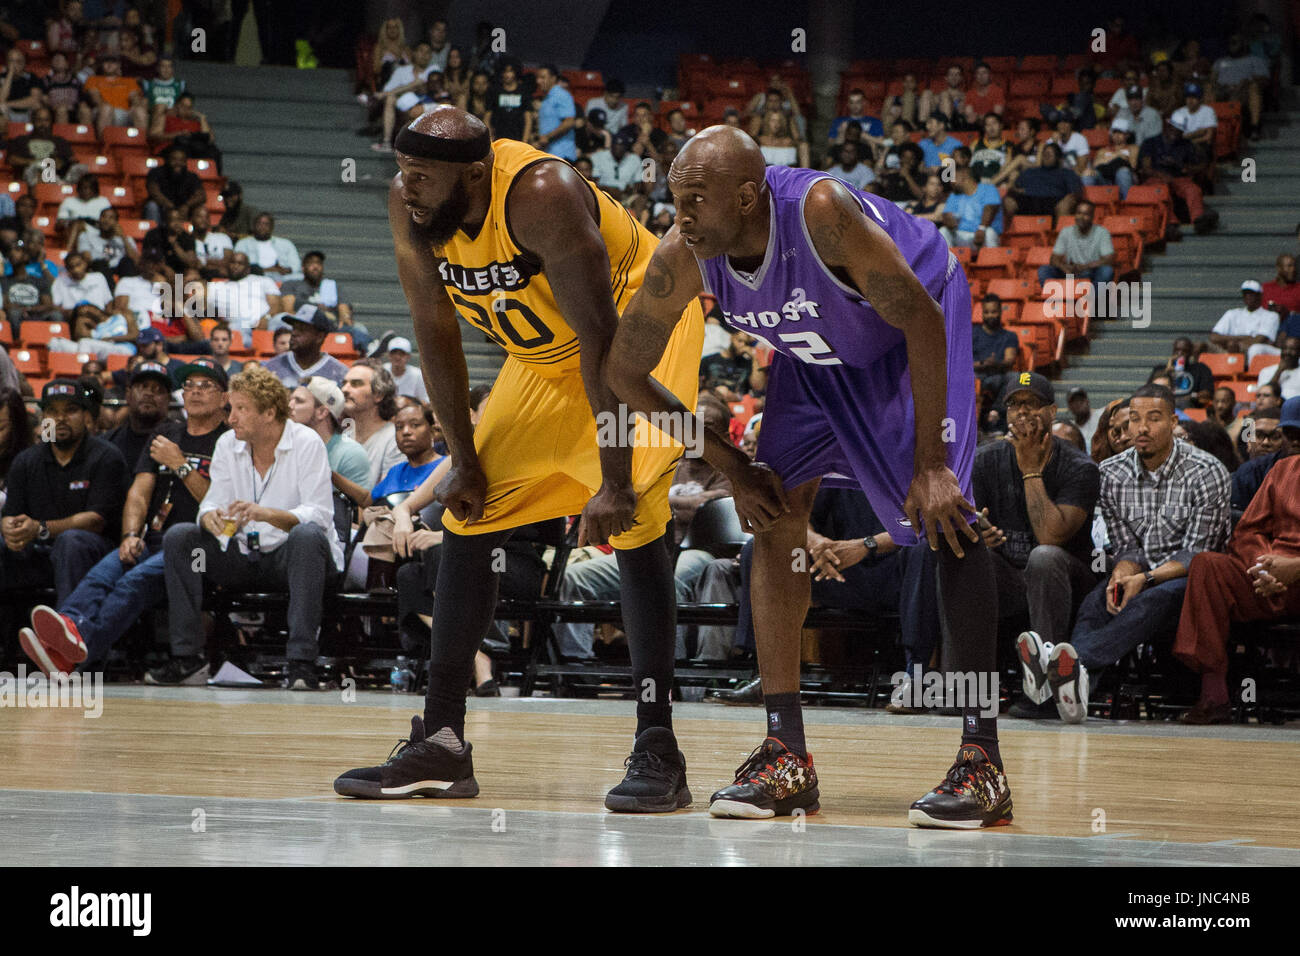 Reggie Evans #30 Killer 3s Joe Smith #32 Ghost Ballers both have their hands their knees waiting by free throw line during Game #4 Big3 Week 5 3-on-3 tournament UIC Pavilion July 23,2017 Chicago,Illinois. Stock Photo